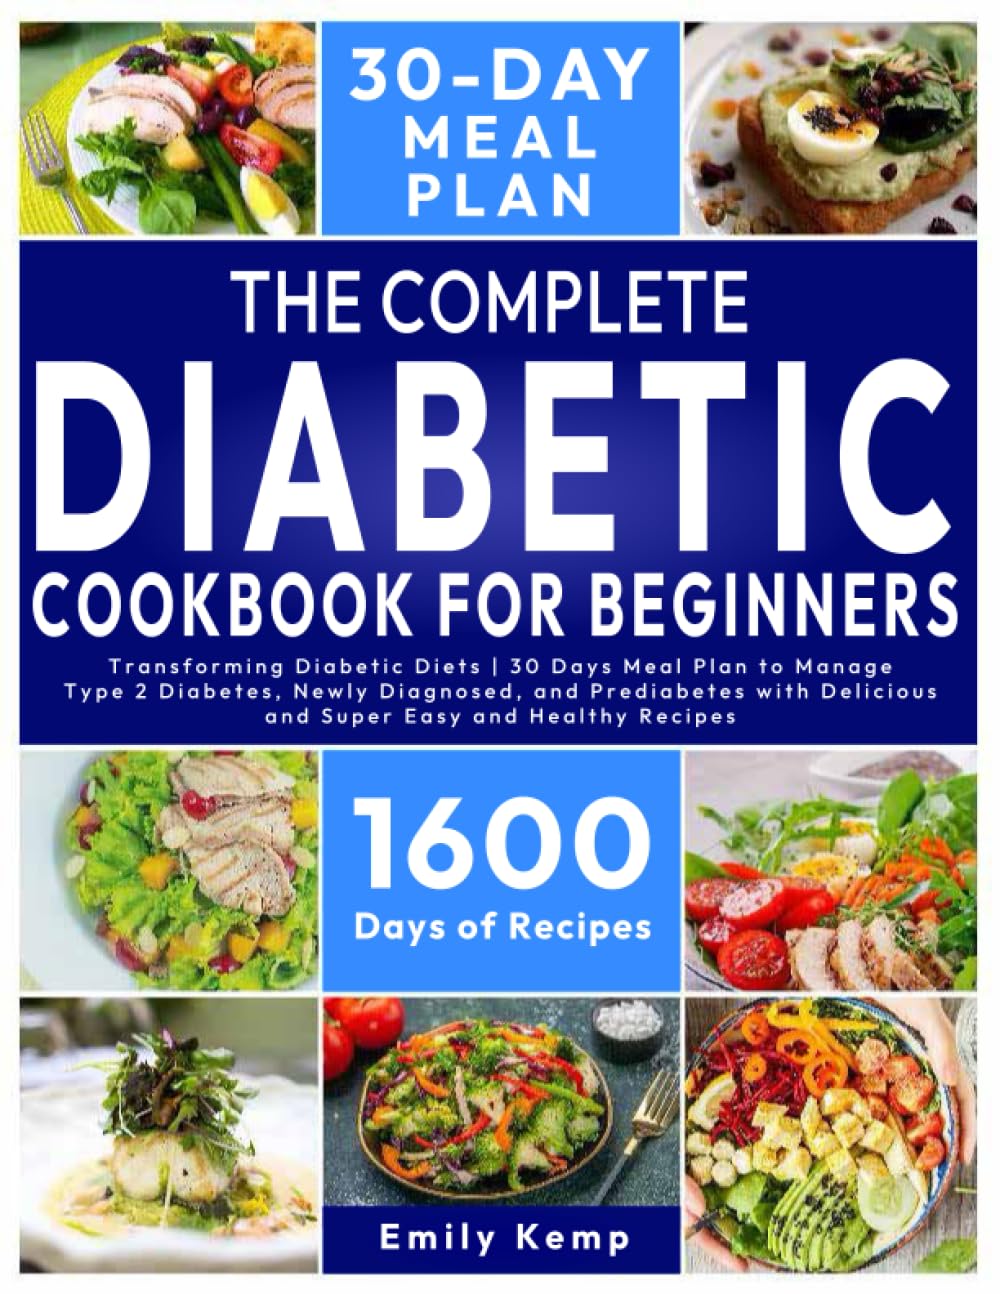 The Complete Diabetic Cookbook for Beginners: Transforming Diabetic Diets | 30 Days Plan To Manage Type 2 Diabetes, Newly Diagnosed, and Prediabetes with Delicious and Super Easy and Healthy Recipes